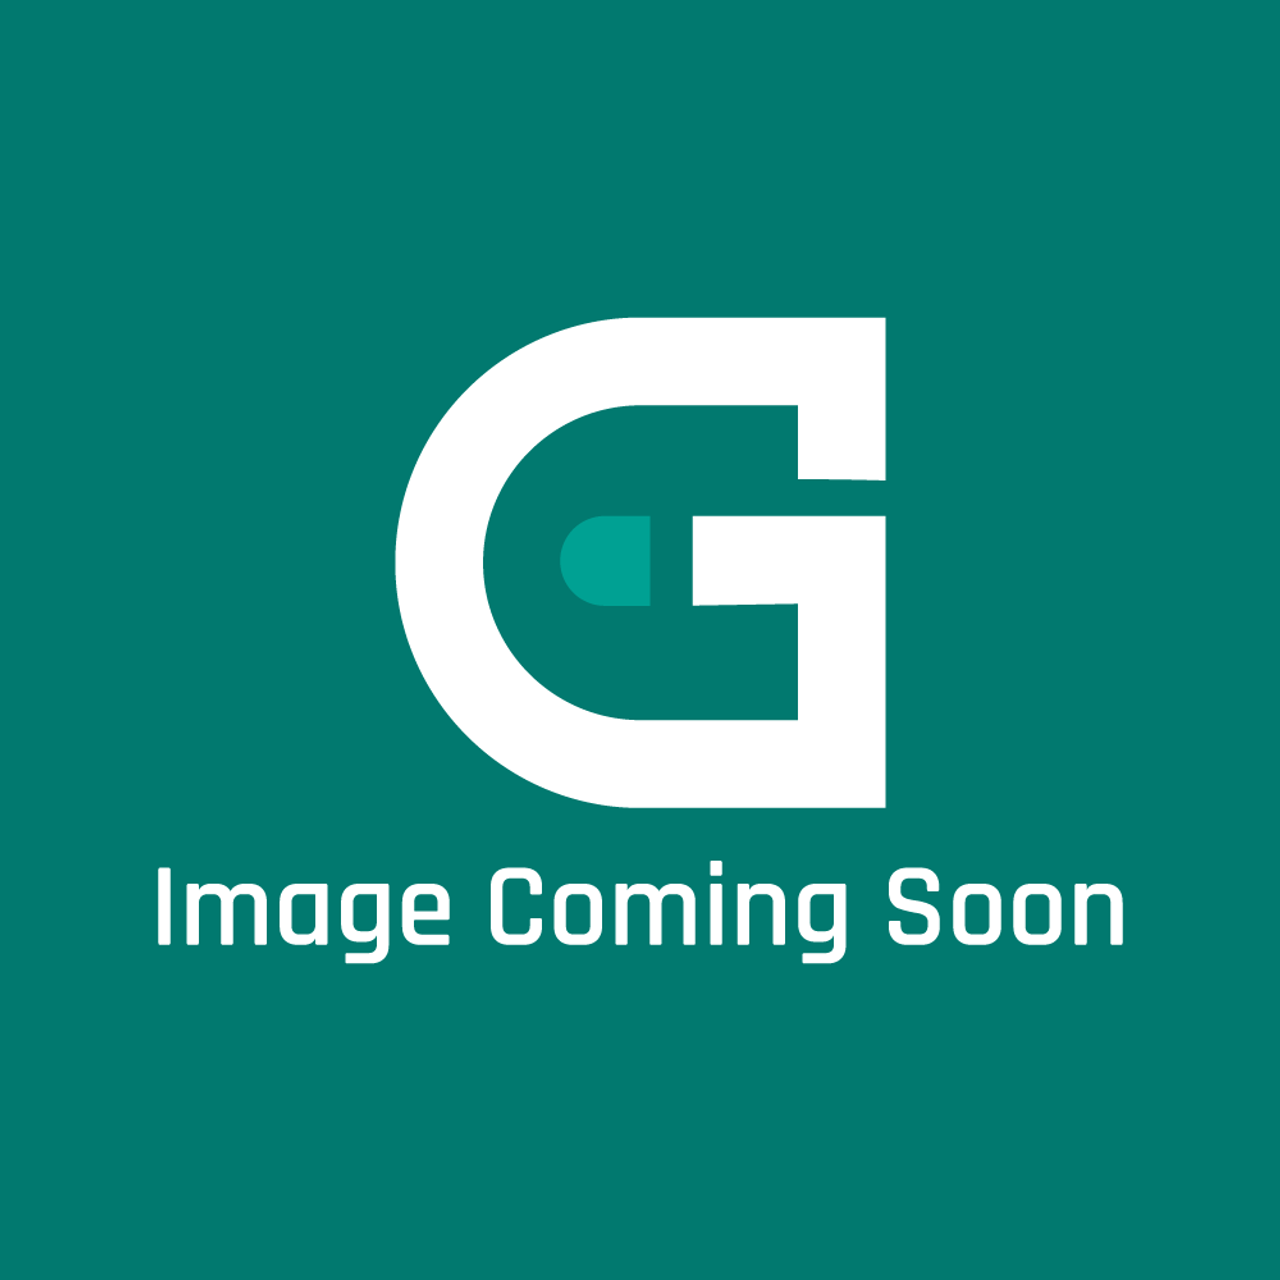 AGA Marvel A5802CRM - Aga Sideplate/Filler Set Crm (Non Dc) 23 - Image Coming Soon!